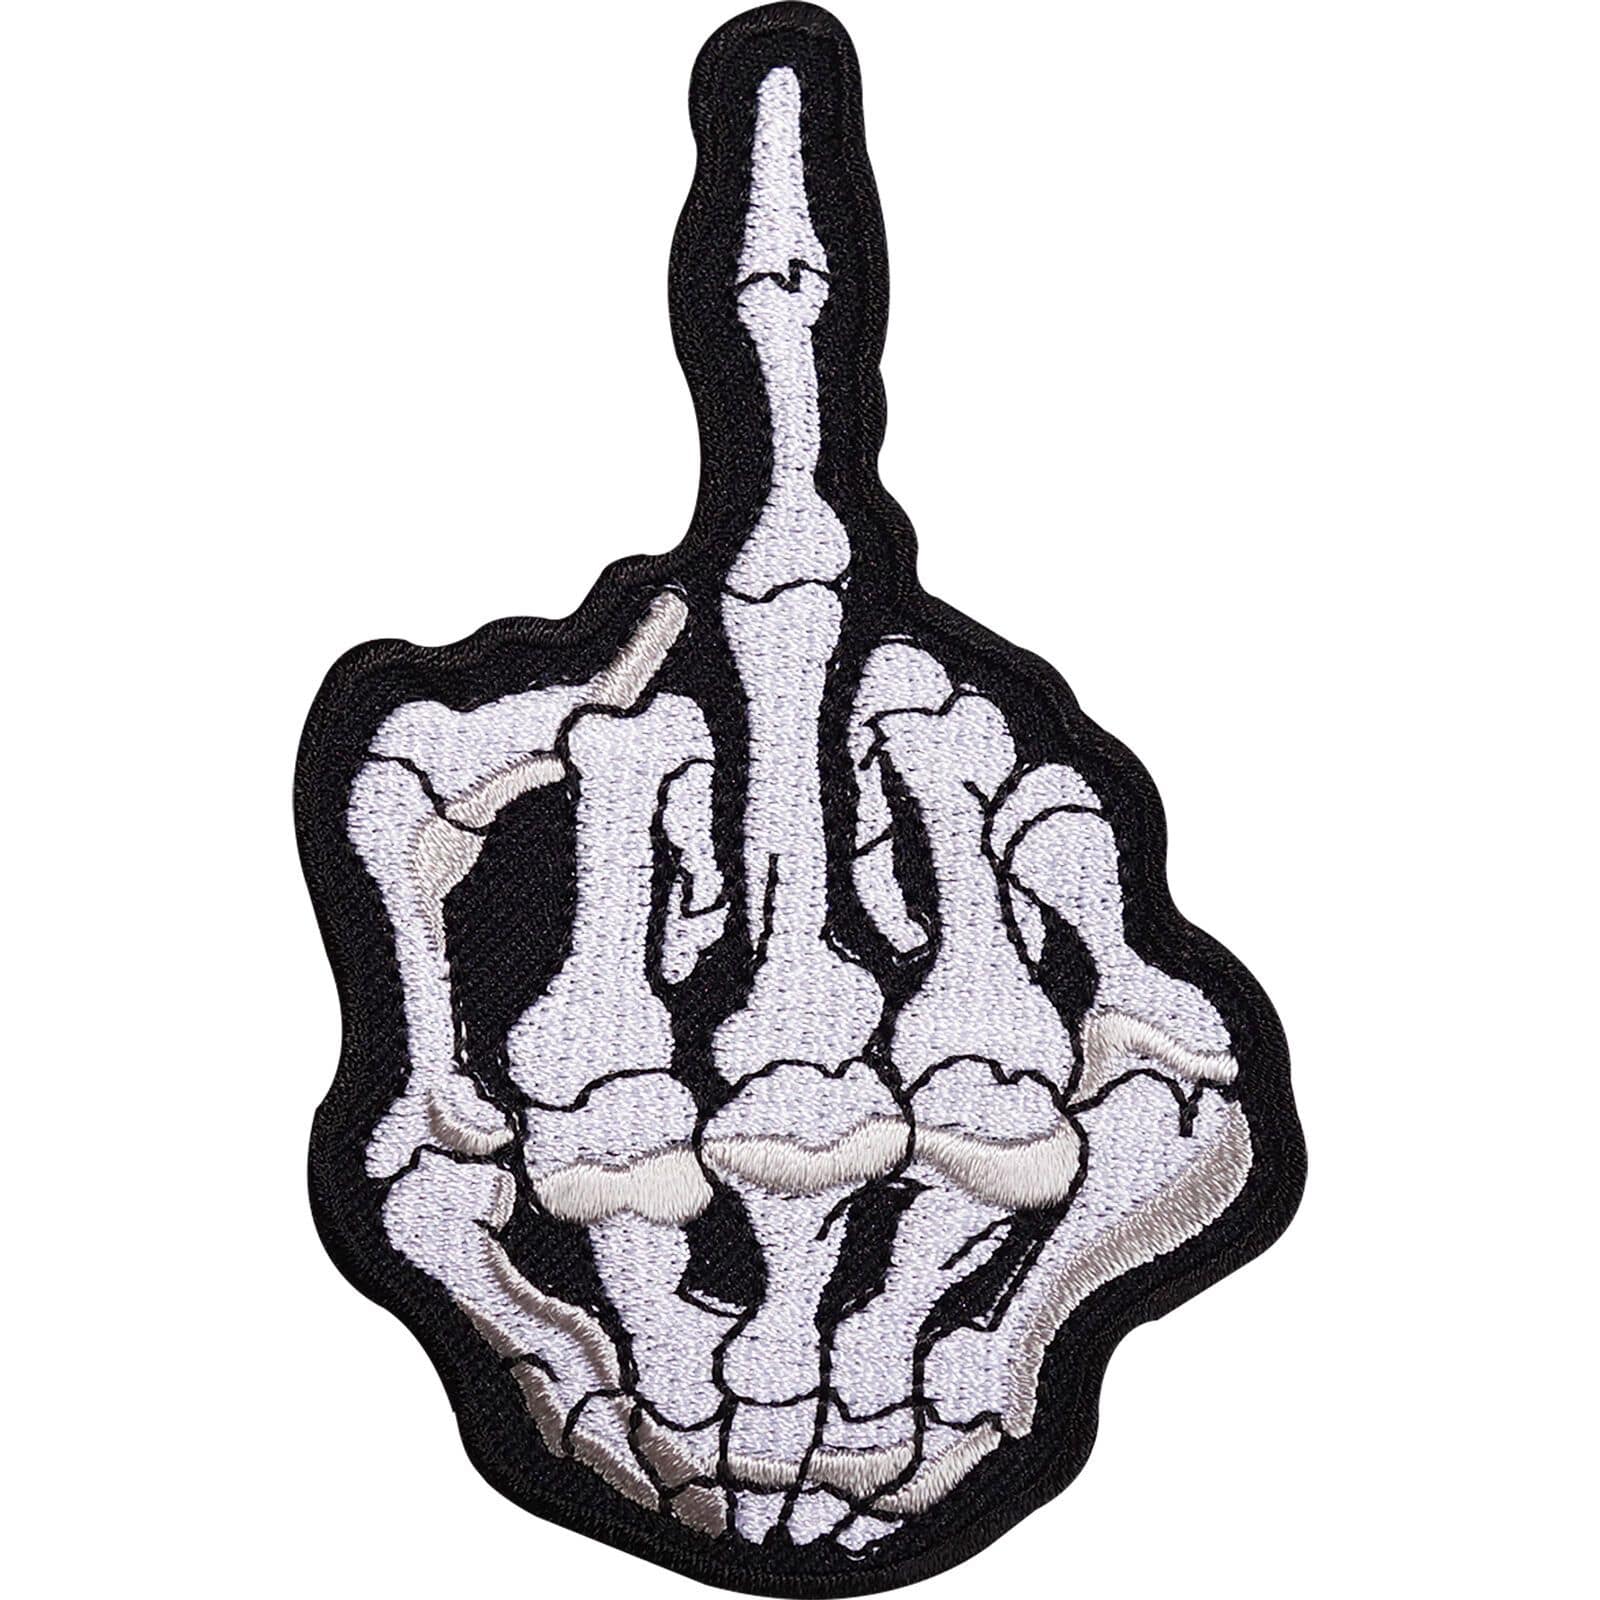 Skeleton Hand Middle Finger Embroidered Iron / Sew On Patch Swear Swearing Badge